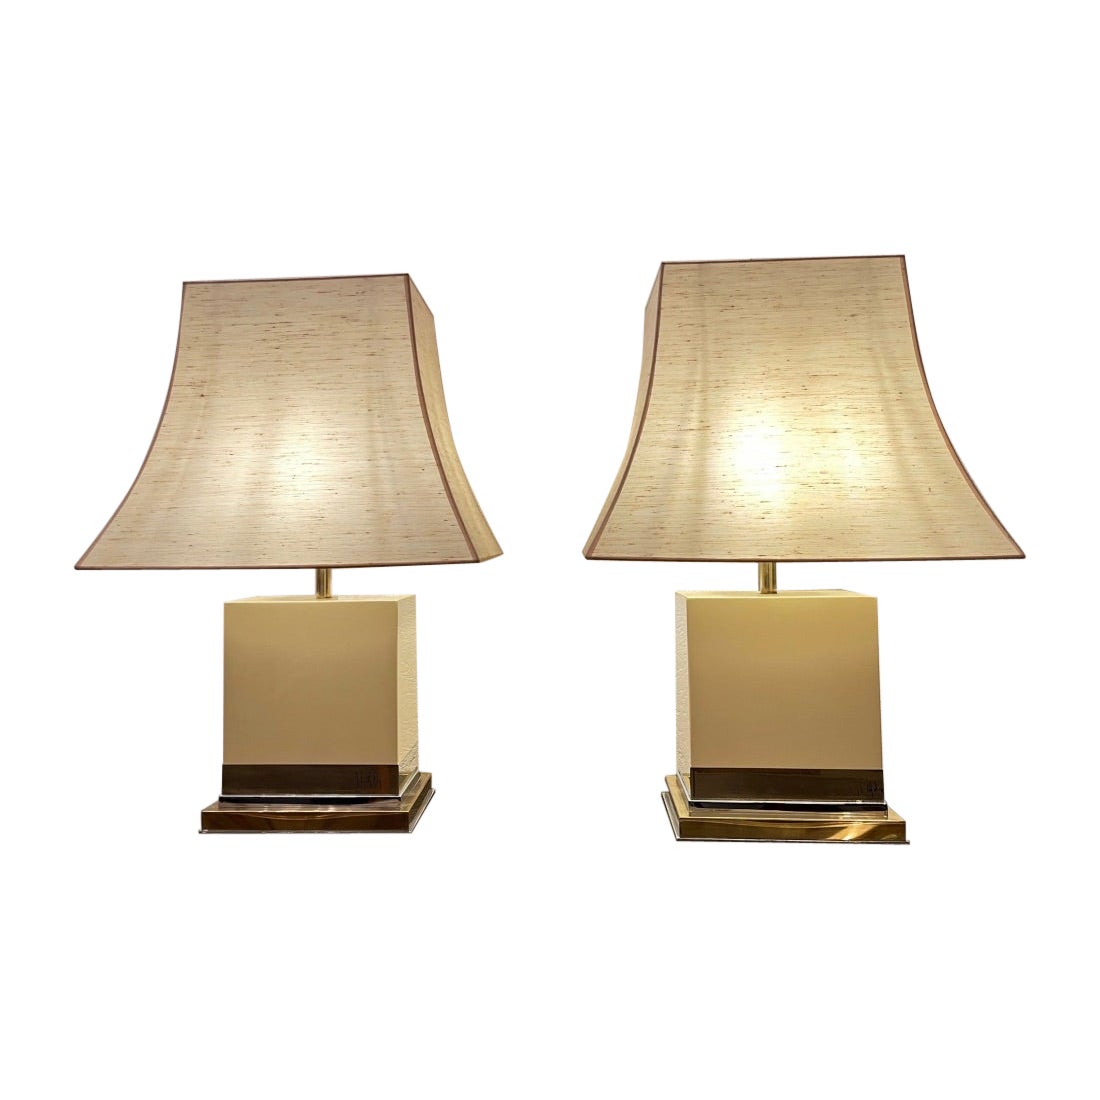 Pair of White Ivory Lacquered Wood & Brass Lamps by Jean Claude Mahey, ca. 1970s For Sale